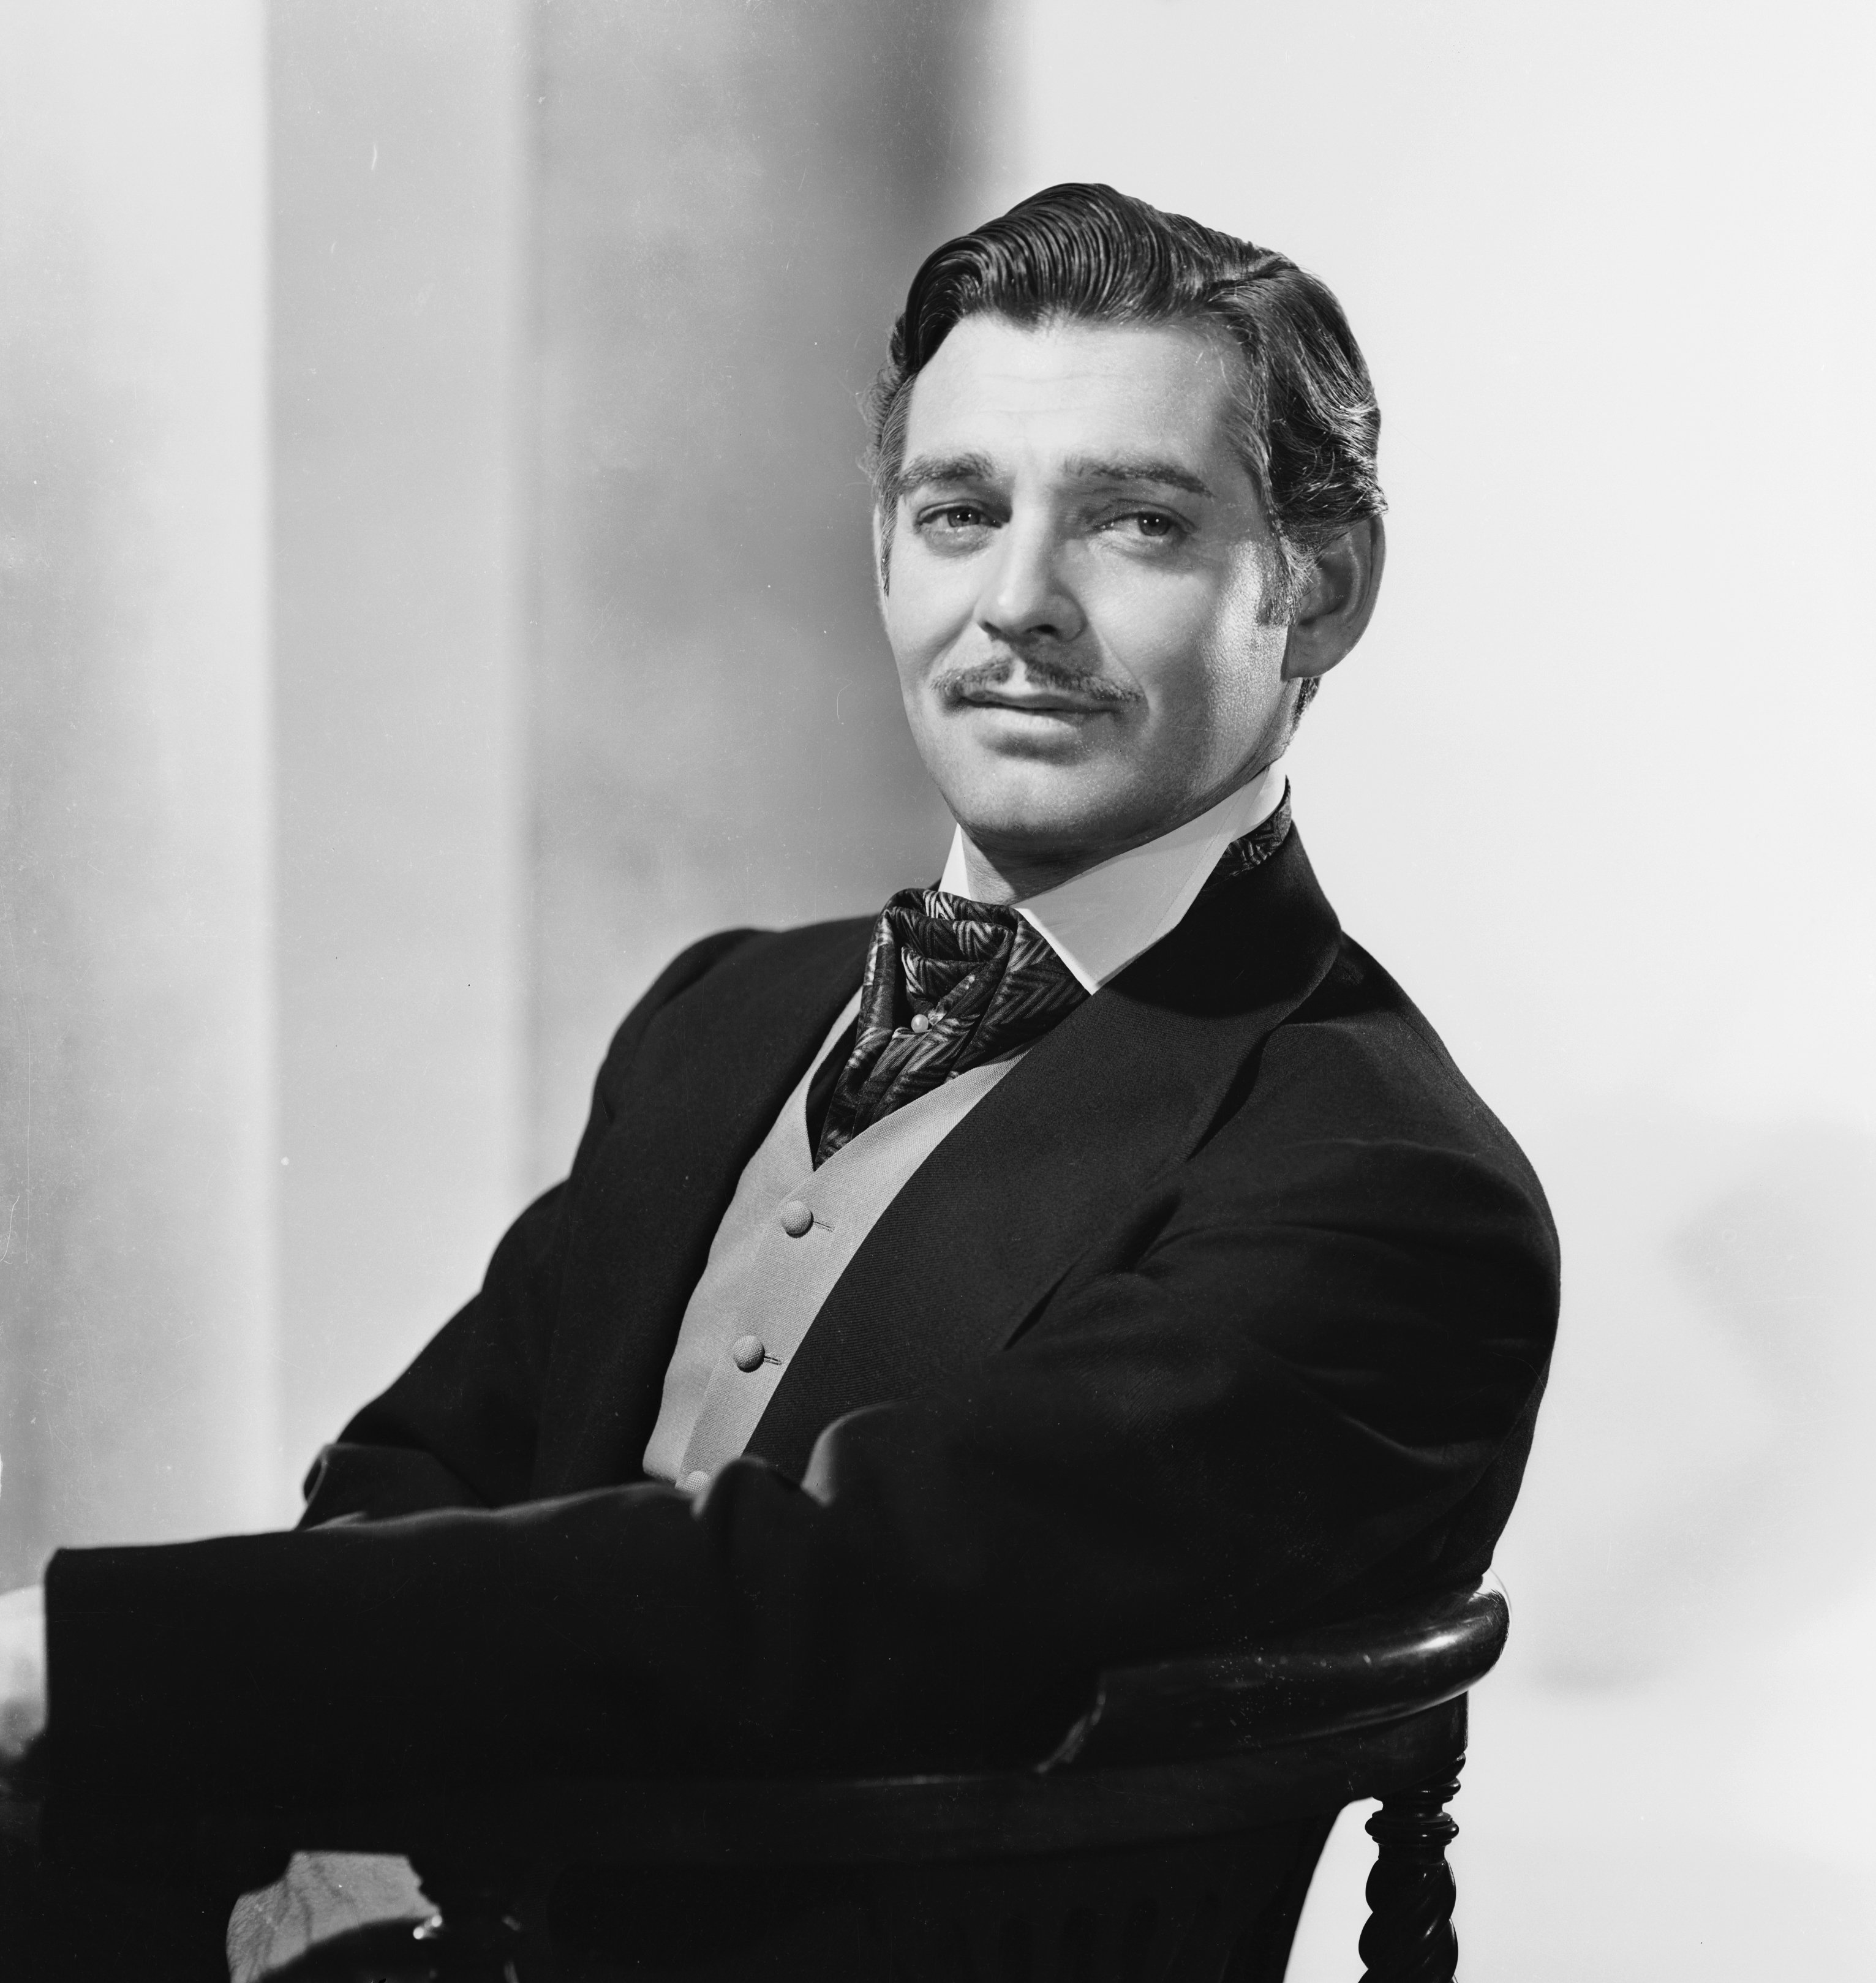 Clark Gable in the film "Gone with the Wind" in 1939. | Source: Getty Images